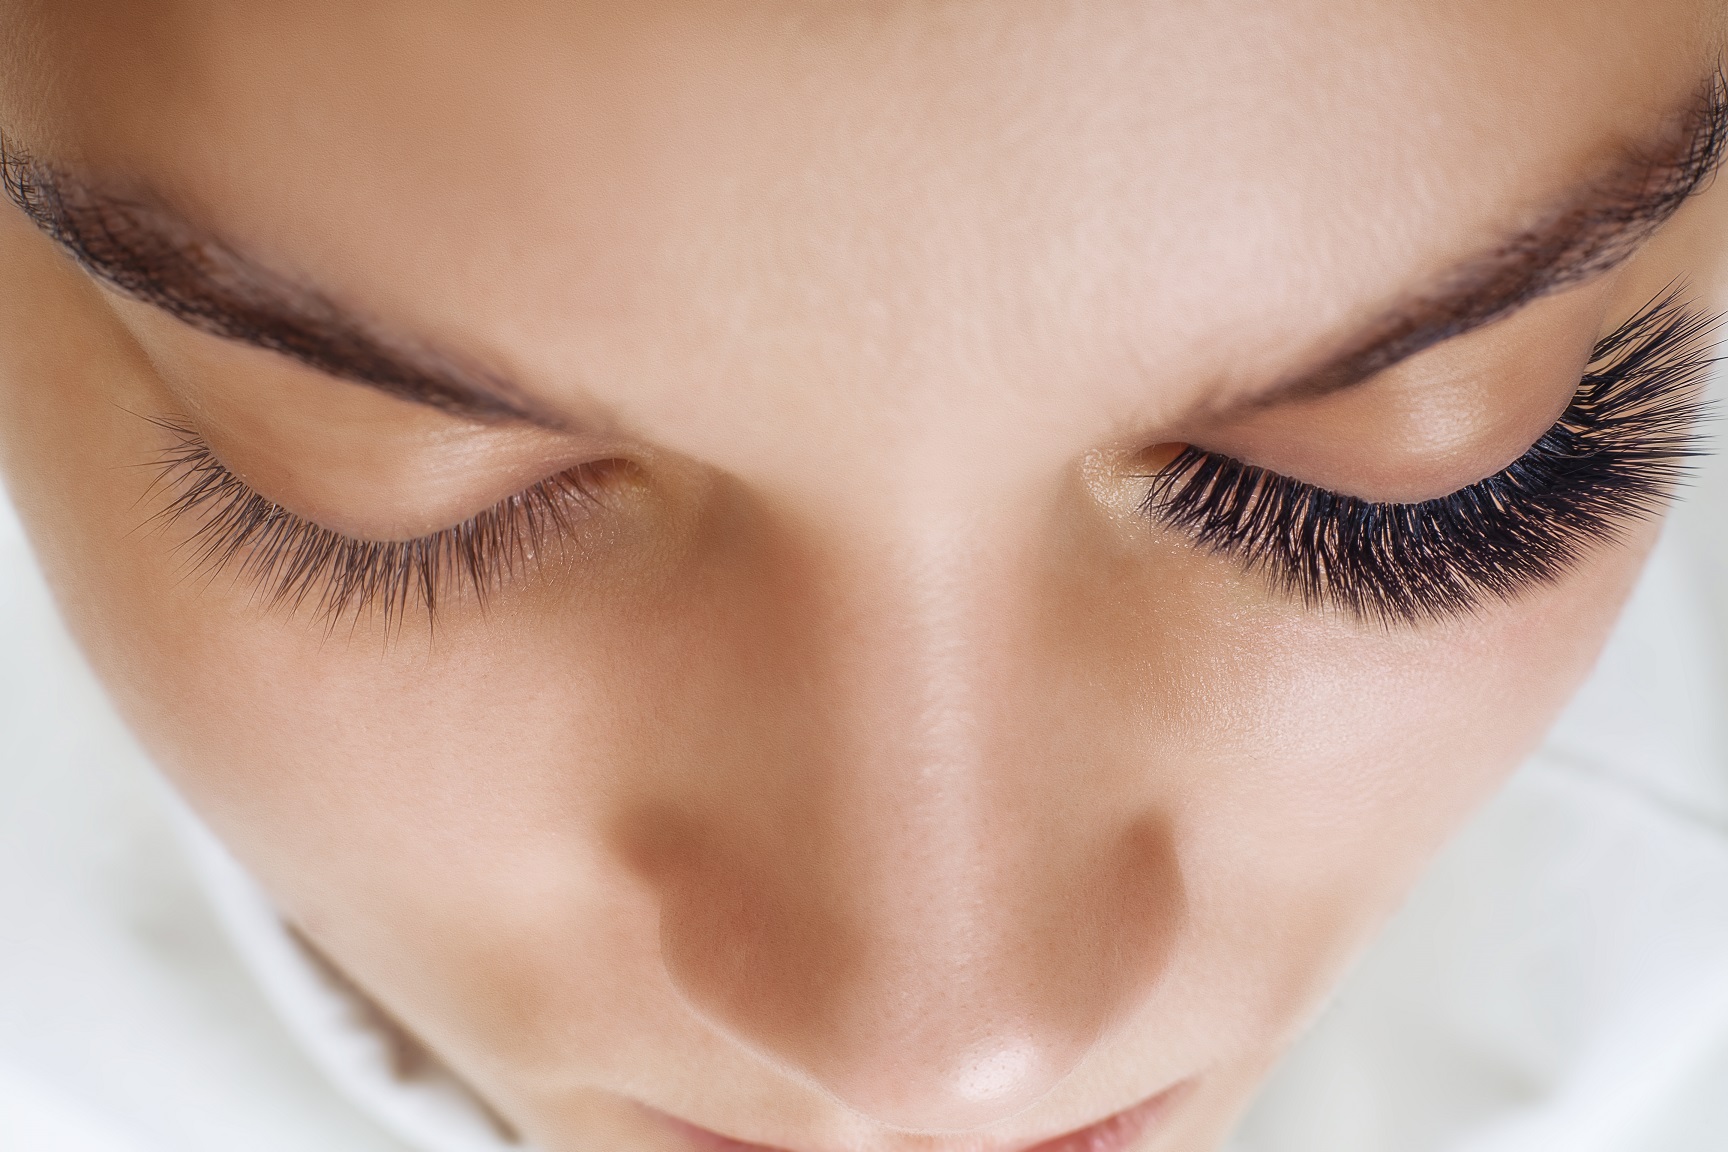 Artificial eyelashes – how to make them last longer?